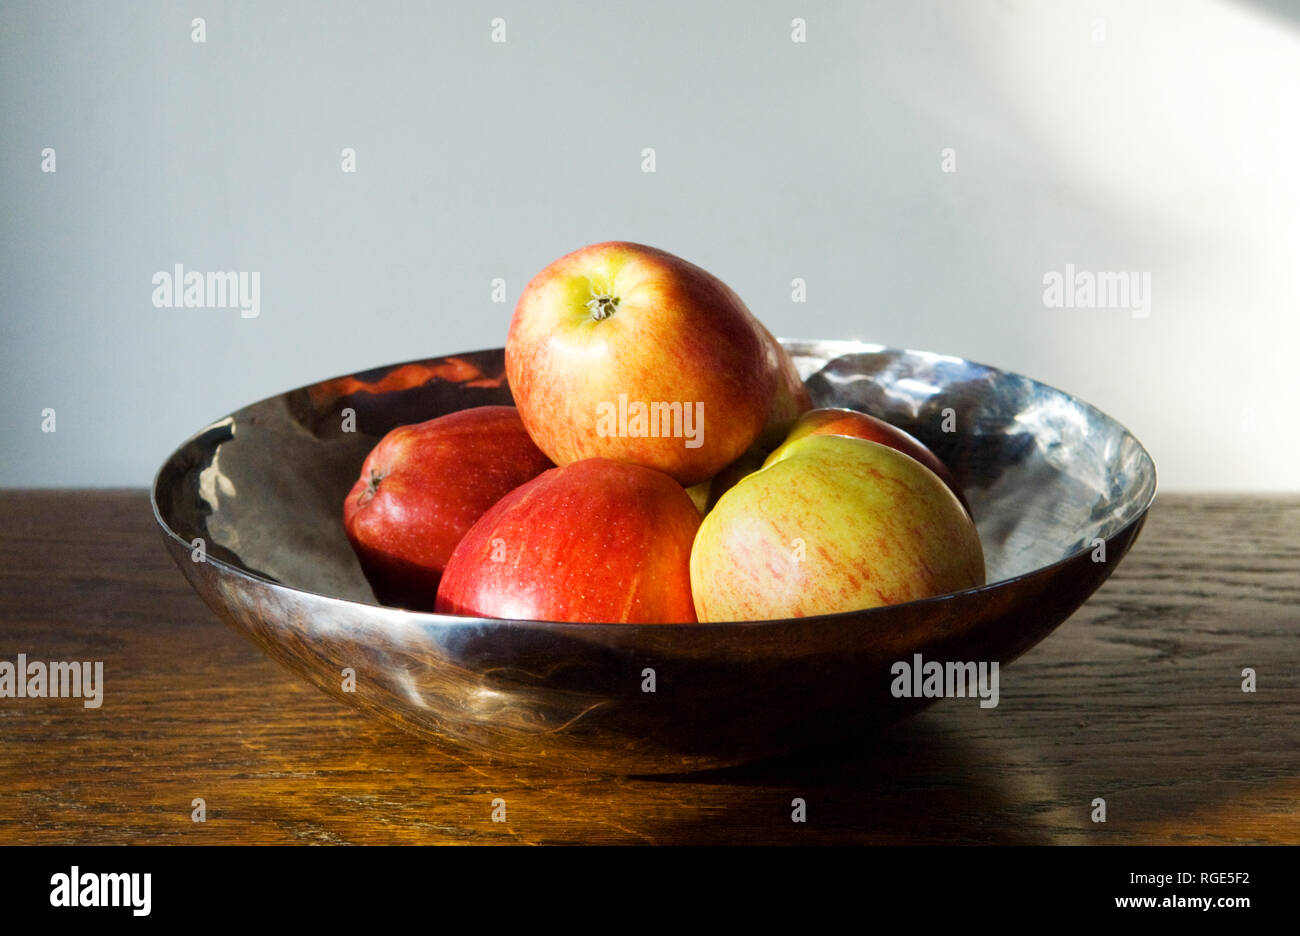 bowl of apples Stock Photo